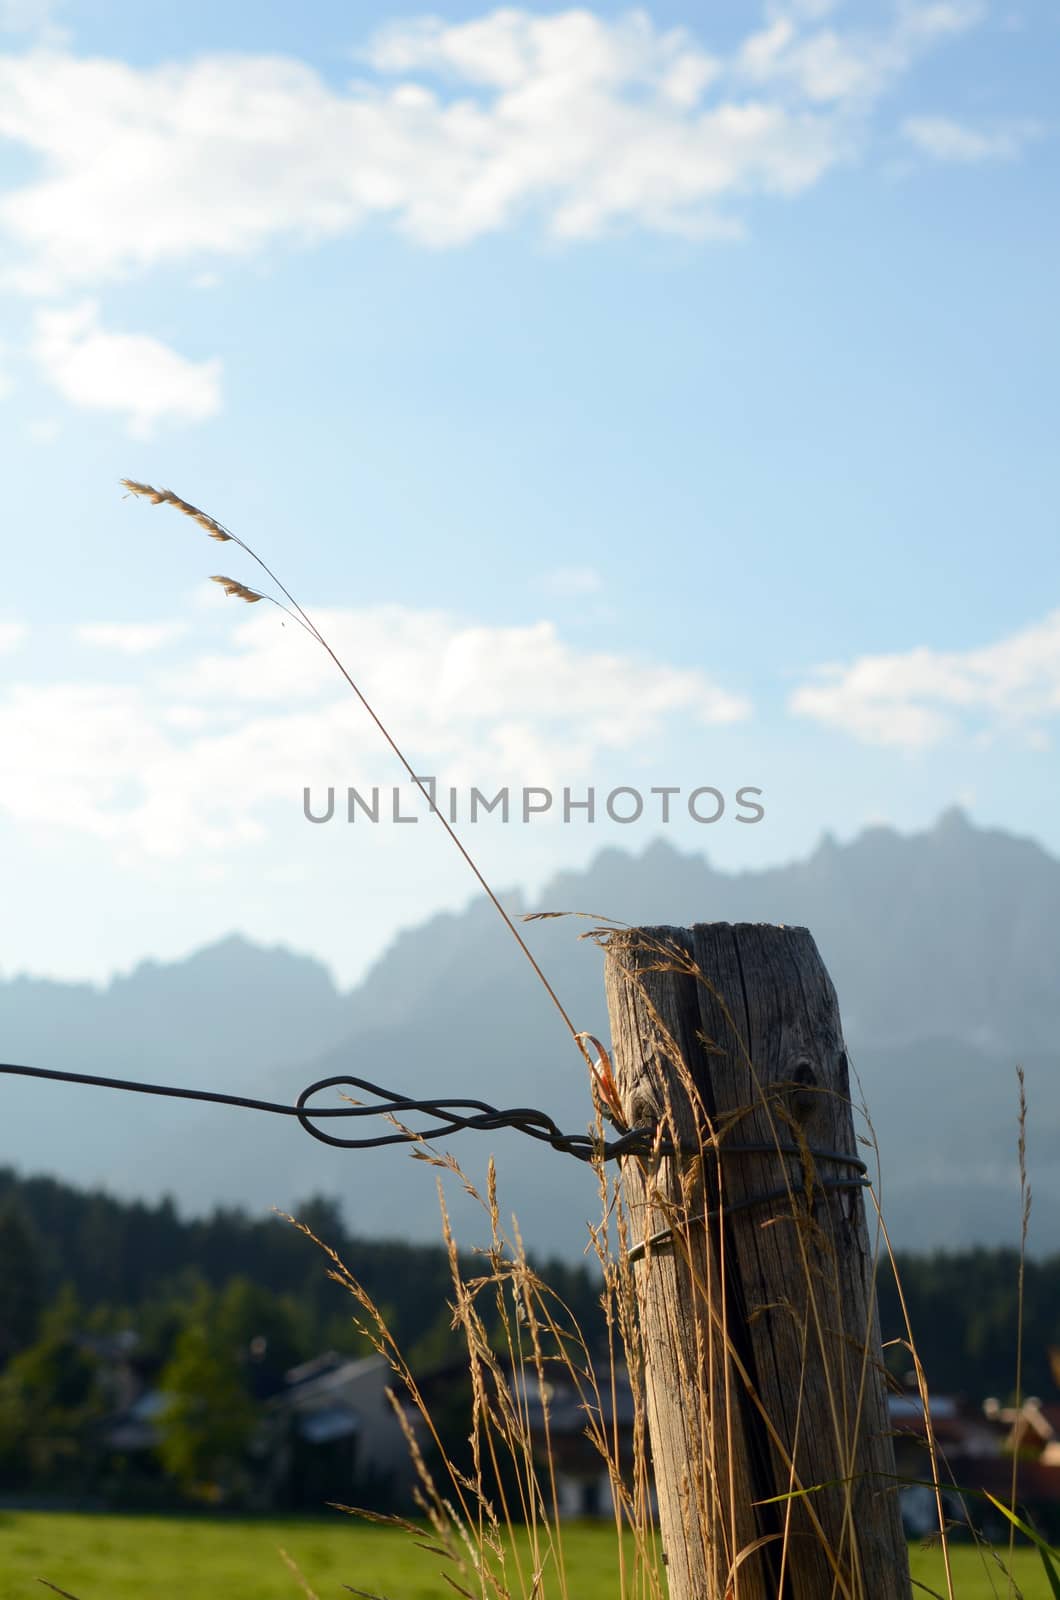 Scenic Mountain Scene With Fence And Grass In The Foreground